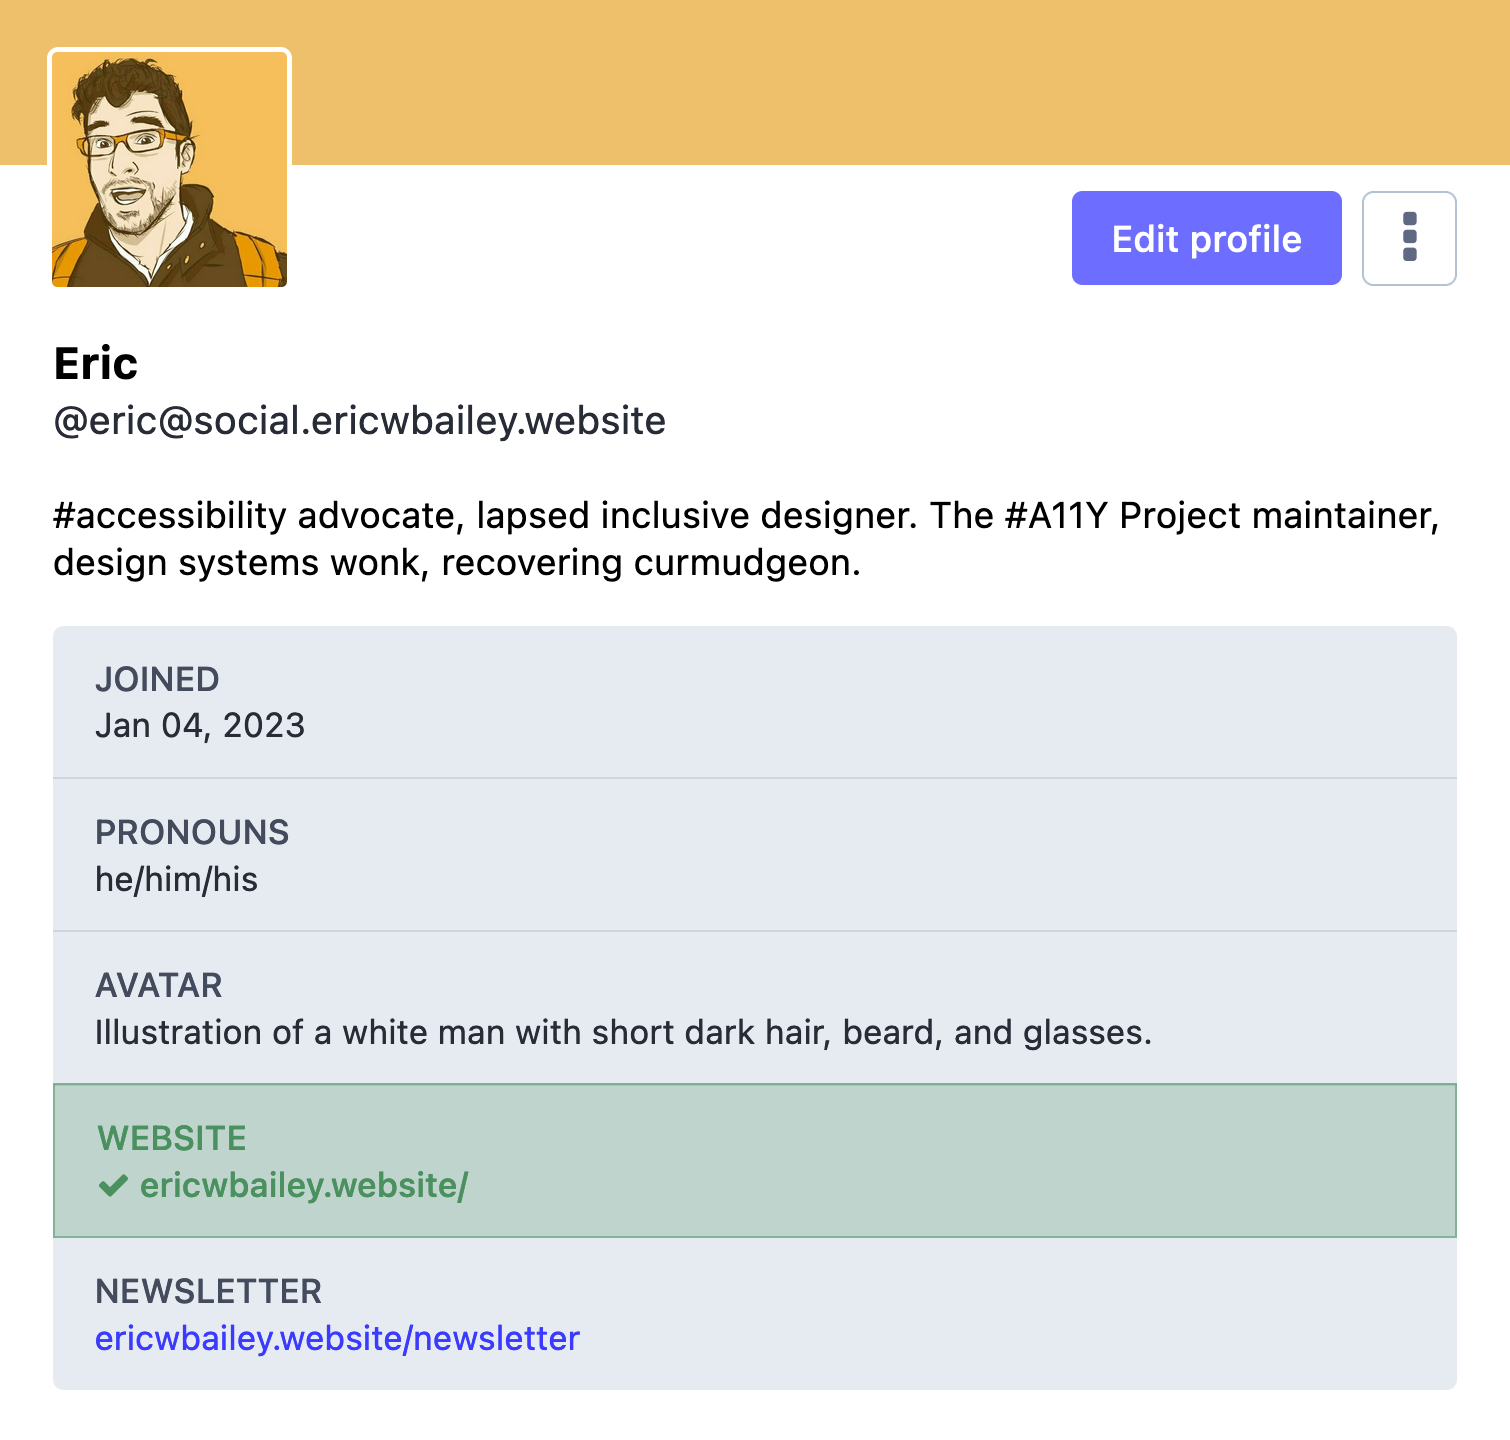 My Mastodon profile. The screenshot includes an avatar, my display name, my Mastodon handle, and my bio statement, as well as a profile information list widget. My display name is, 'Eric', my Mastodon handle is '@eric@social.ericwbailey.website', and by bio is, '#accessibility advocate, lapsed inclusive designer. The #A11Y Project maintainer, design systems wonk, recovering curmudgeon.' The list widget has five rows. The first row is titled, 'Joined', and has a value of 'Jan 04, 2023'. The second row is titled, 'Pronouns', and has a value of 'he/him/his'. The third row has a title of 'Avatar', and has a value of 'Illustration of a white man with short dark hair, beard, and glasses.' The fourth row has a title of 'Website', and a value of 'ericwbailey.website.' It also has a green highlight and a checkmark icon before the website URL value, indicating I have verified ownership of my domain. The fifth row has a title of 'Newsletter', with a value of 'ericwbailey.website/newsletter'. A prominent button labeled, 'Edit profile' is also present. Cropped screenshot.